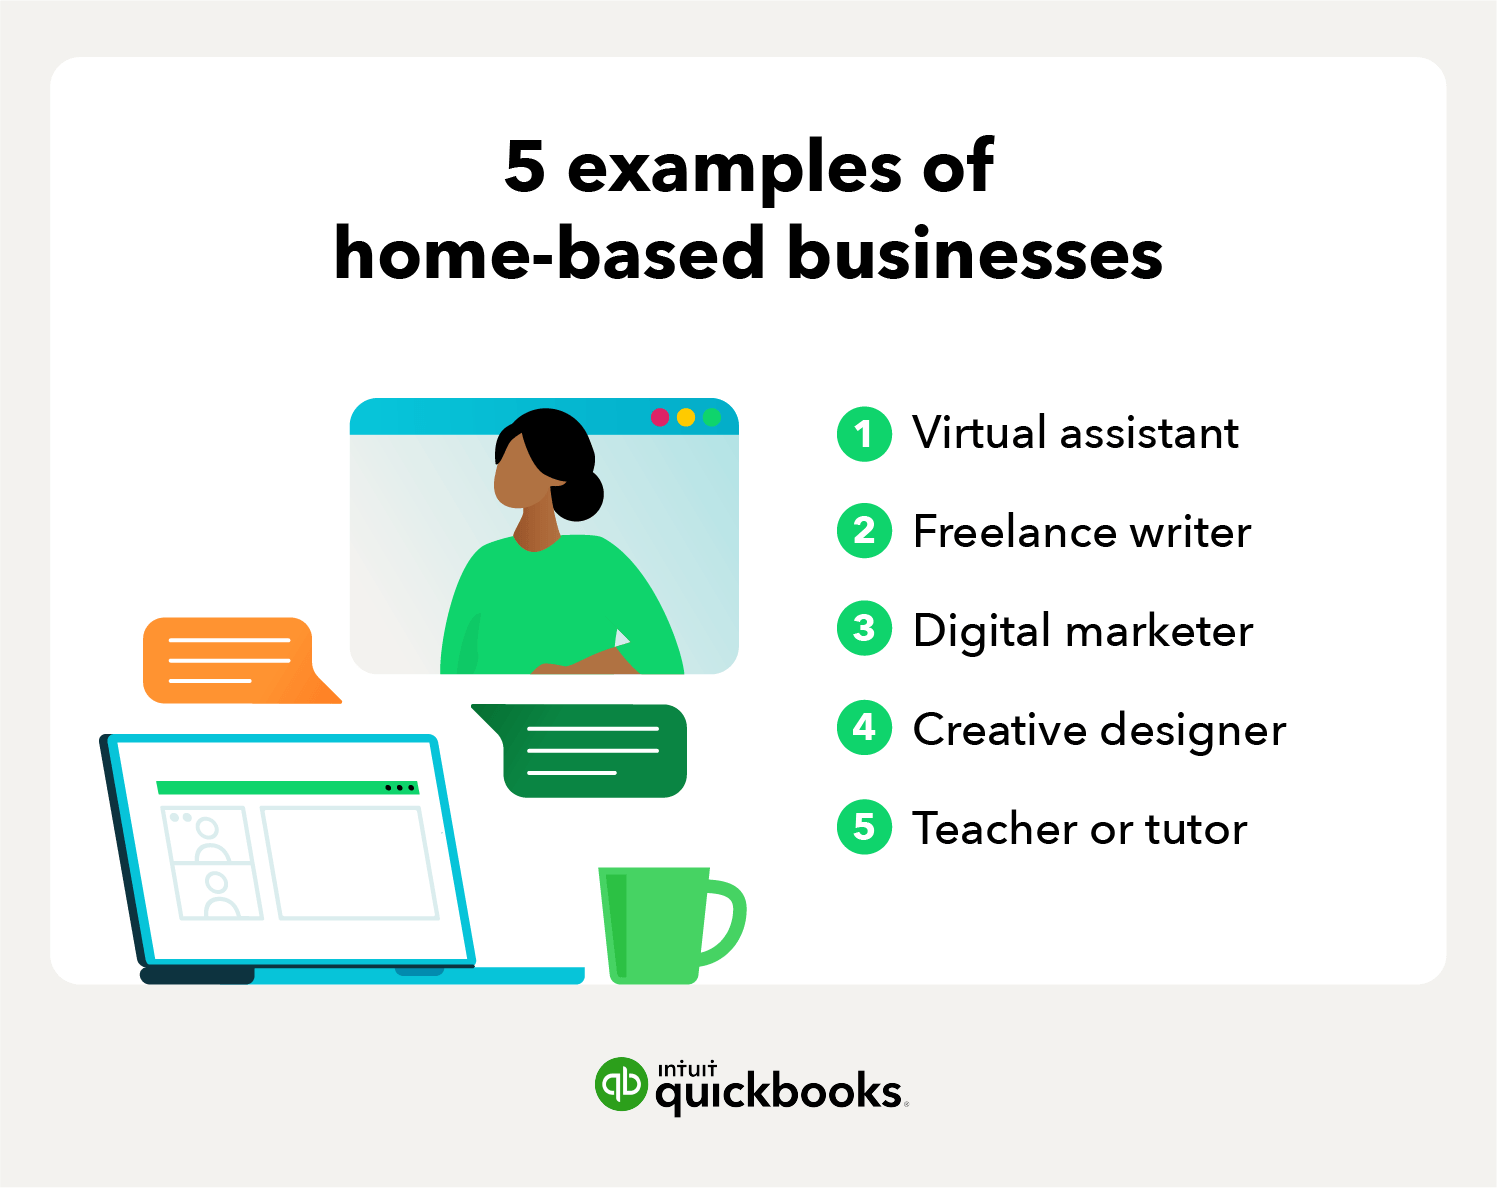 5 examples of home-based businesses